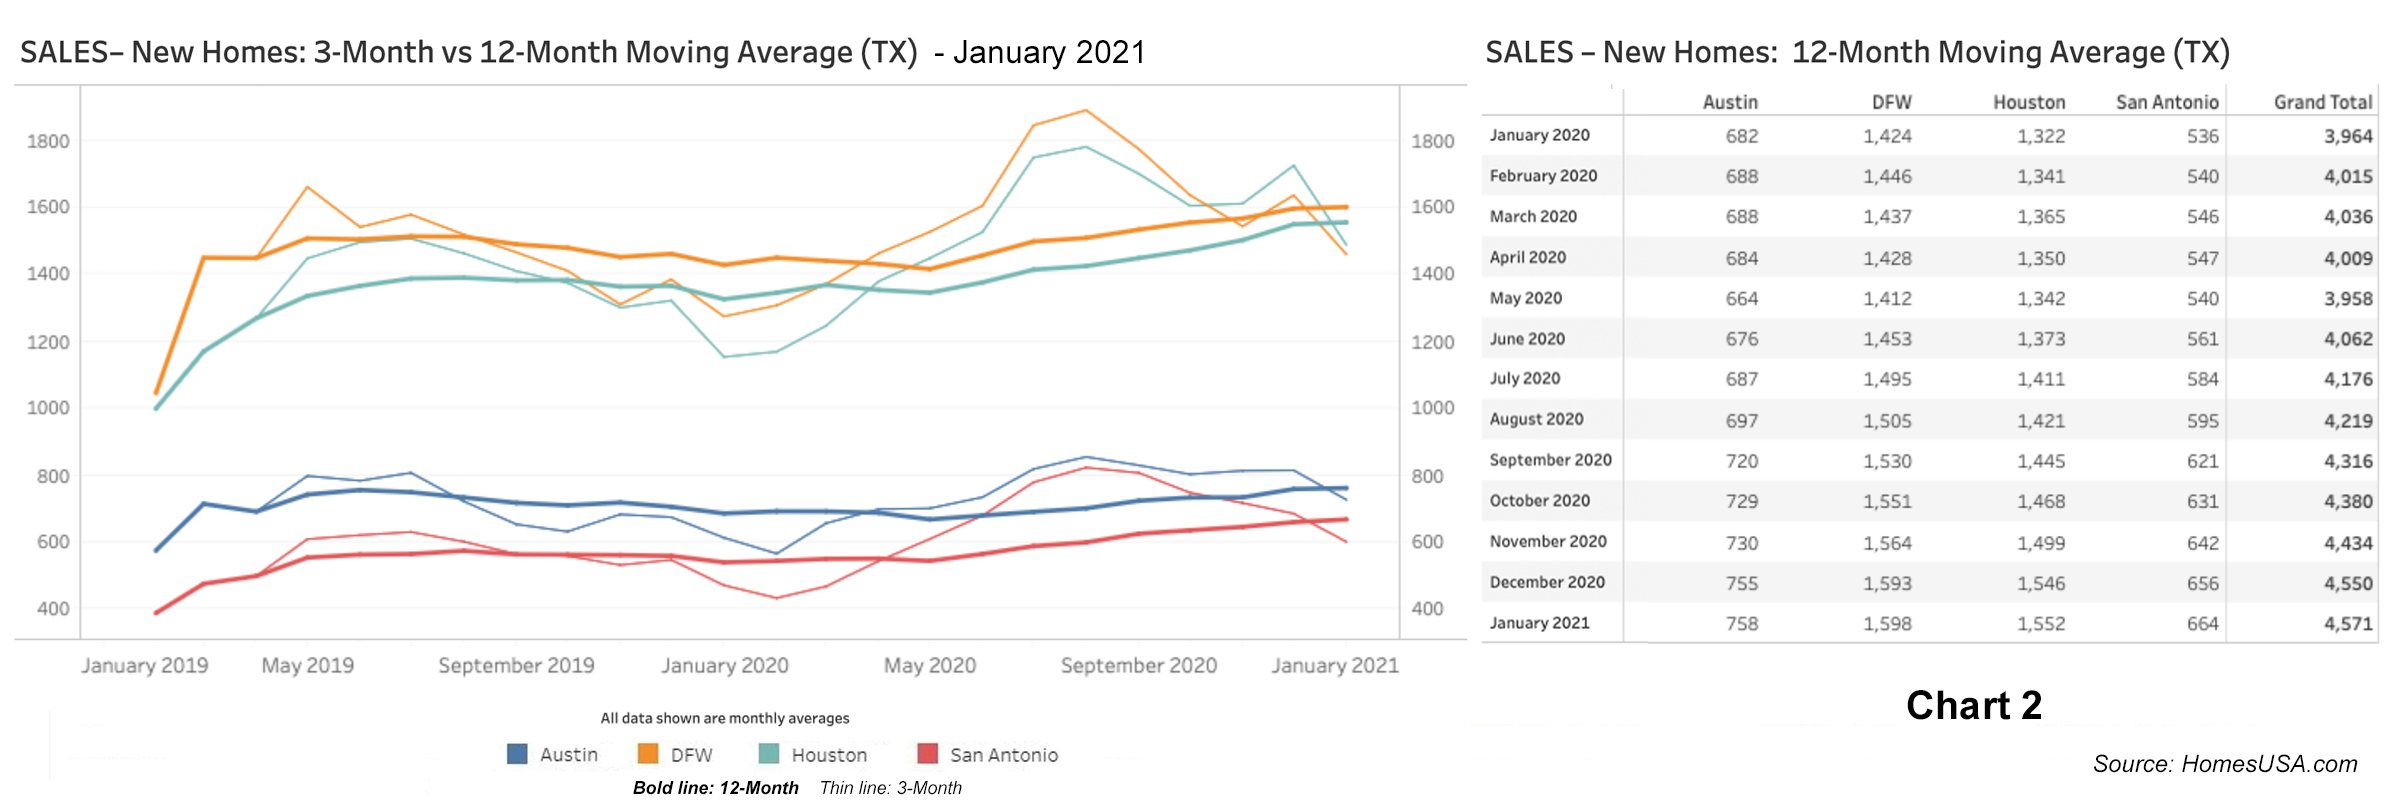 Chart 2: Texas New Home Sales - January 2021